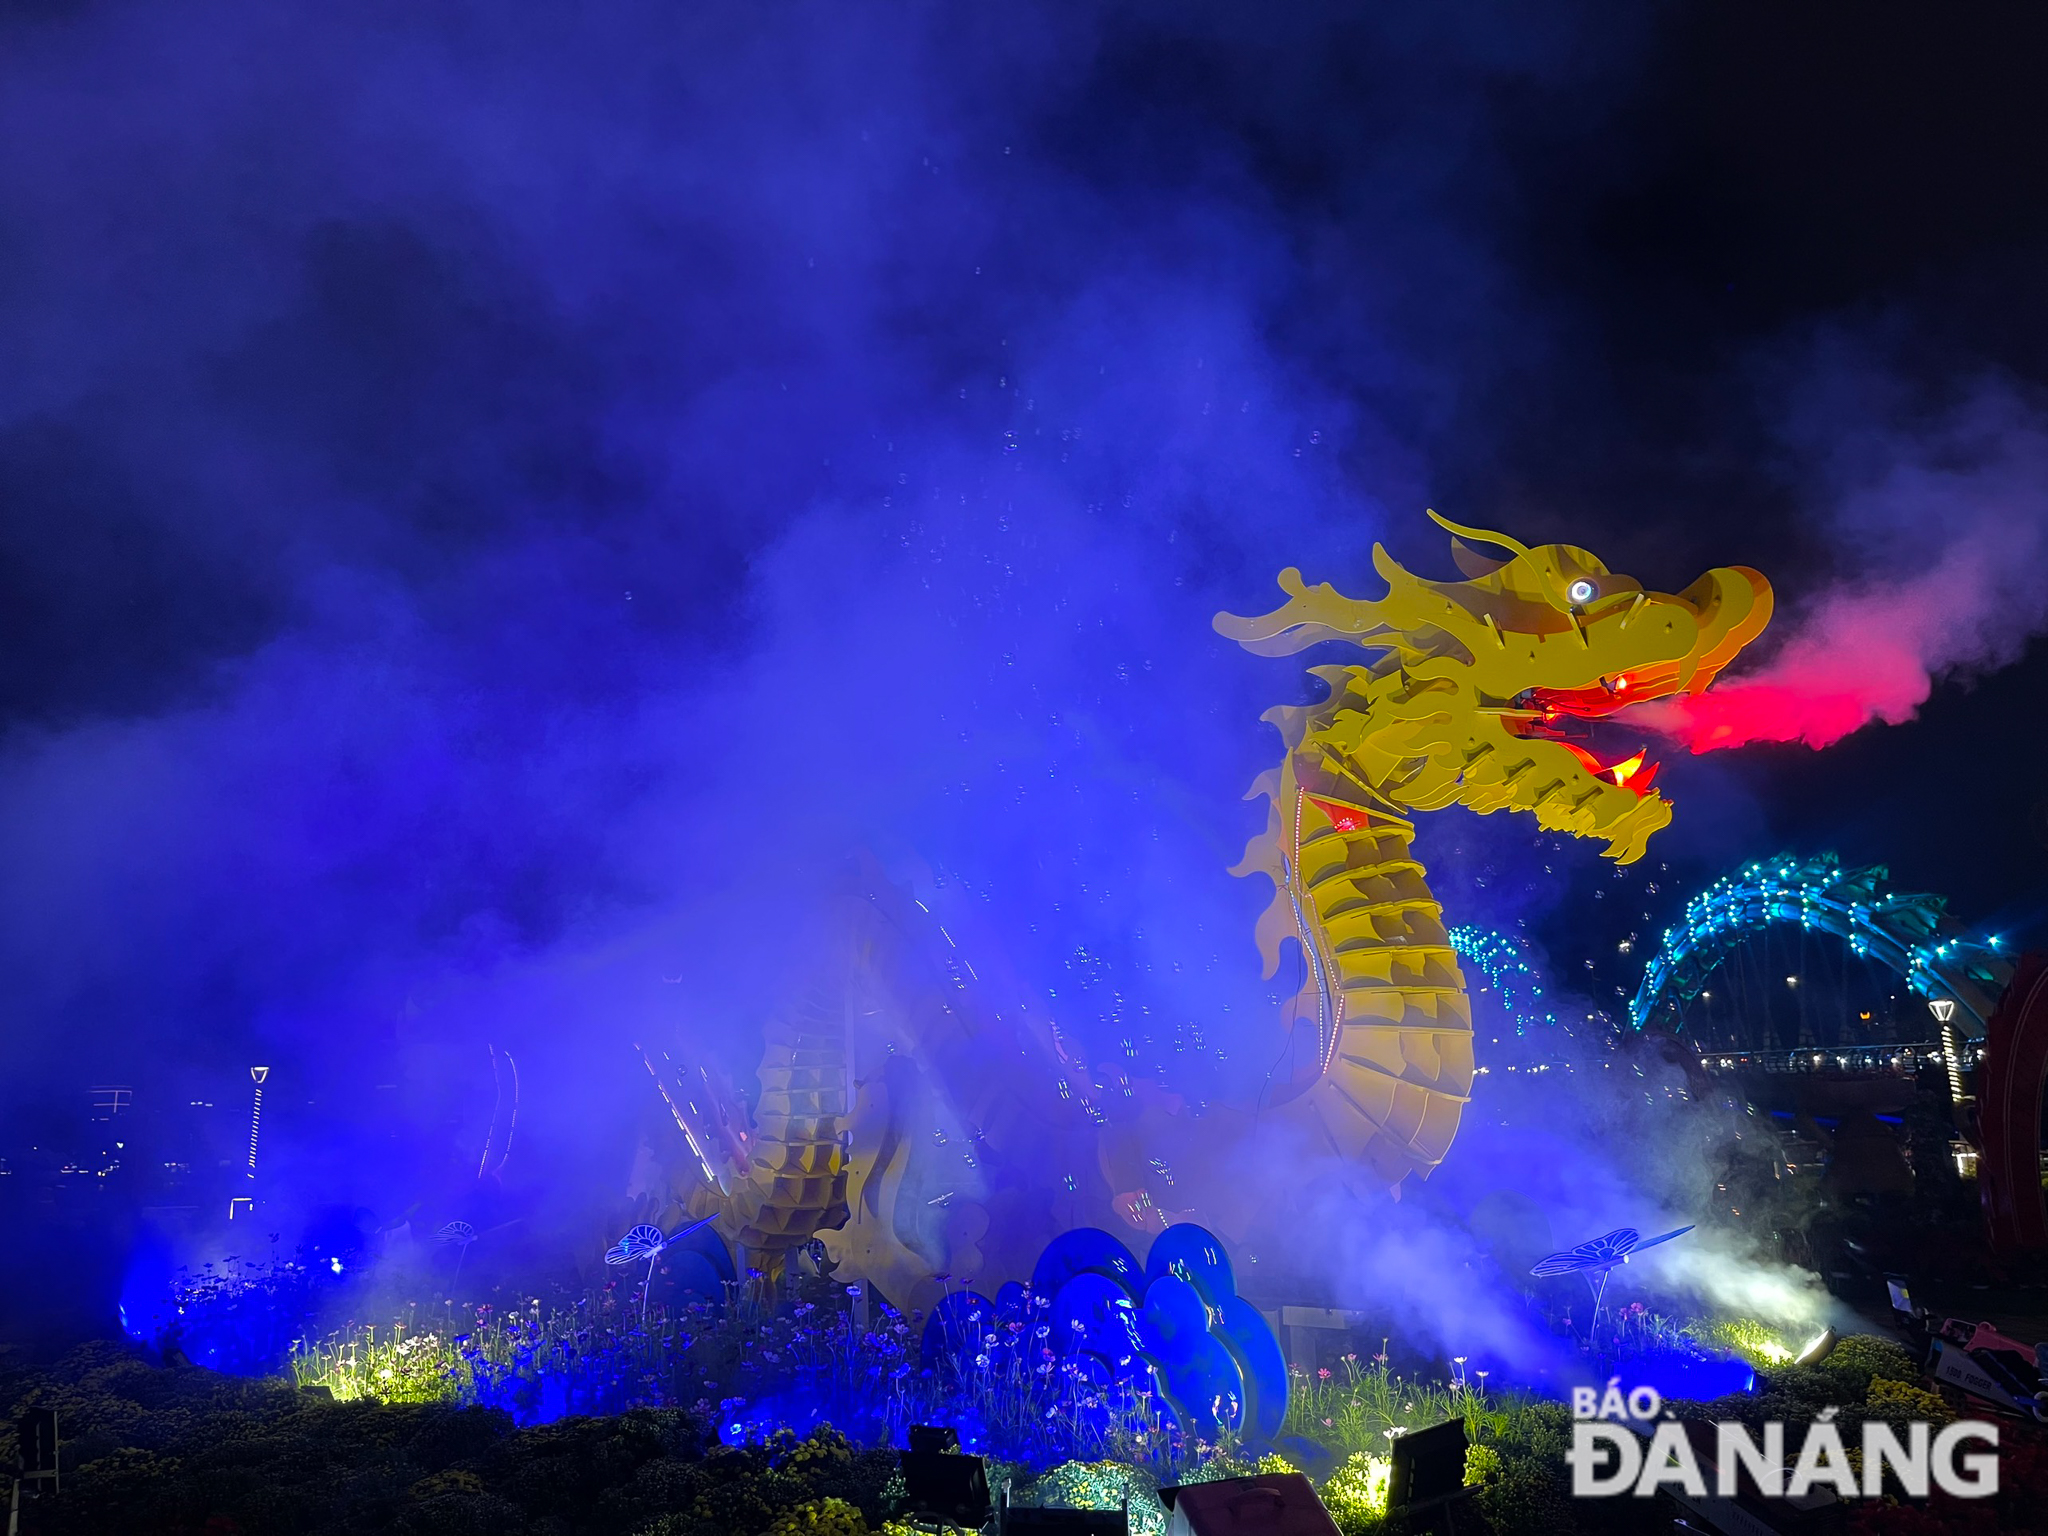 The Dragon mascot symbol on the western bank of the Dragon Bridge can breathe fire, creating a new impression for both locals and tourists.